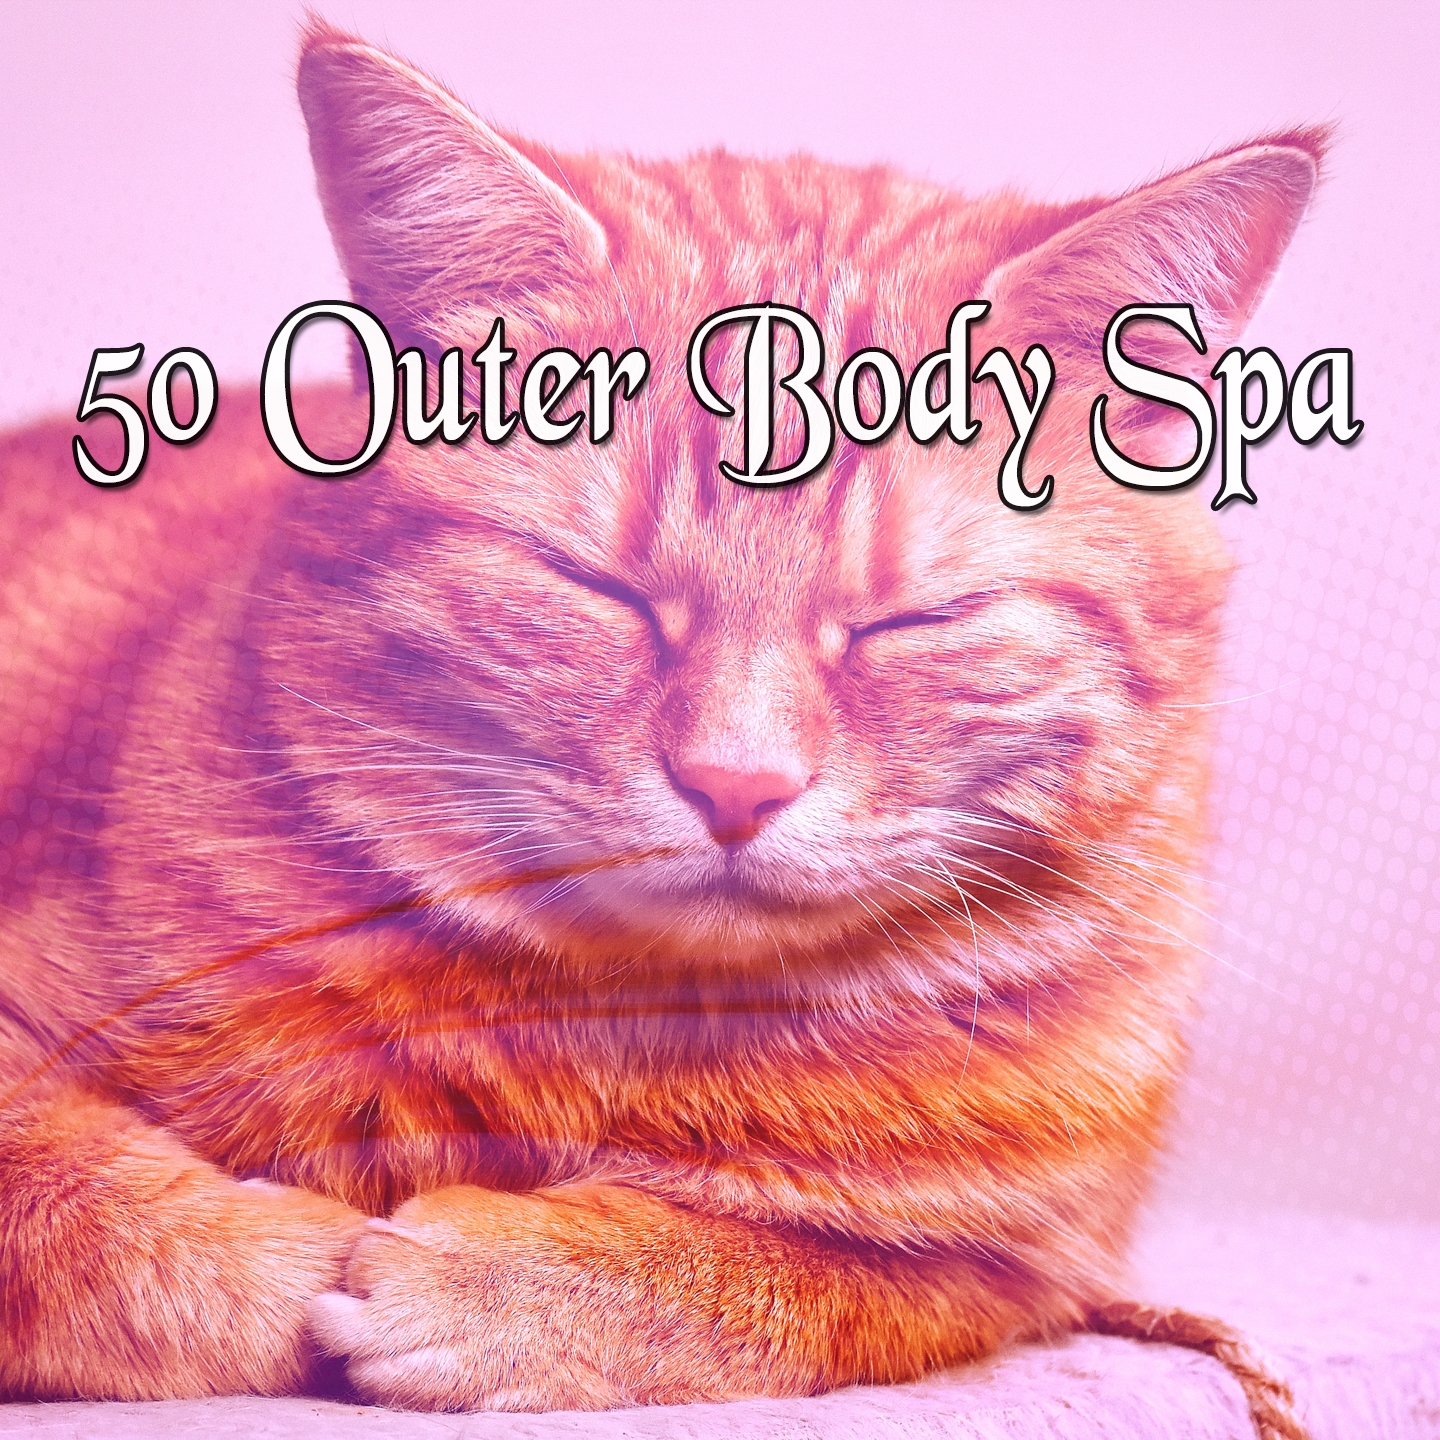 50 Outer Body Spa